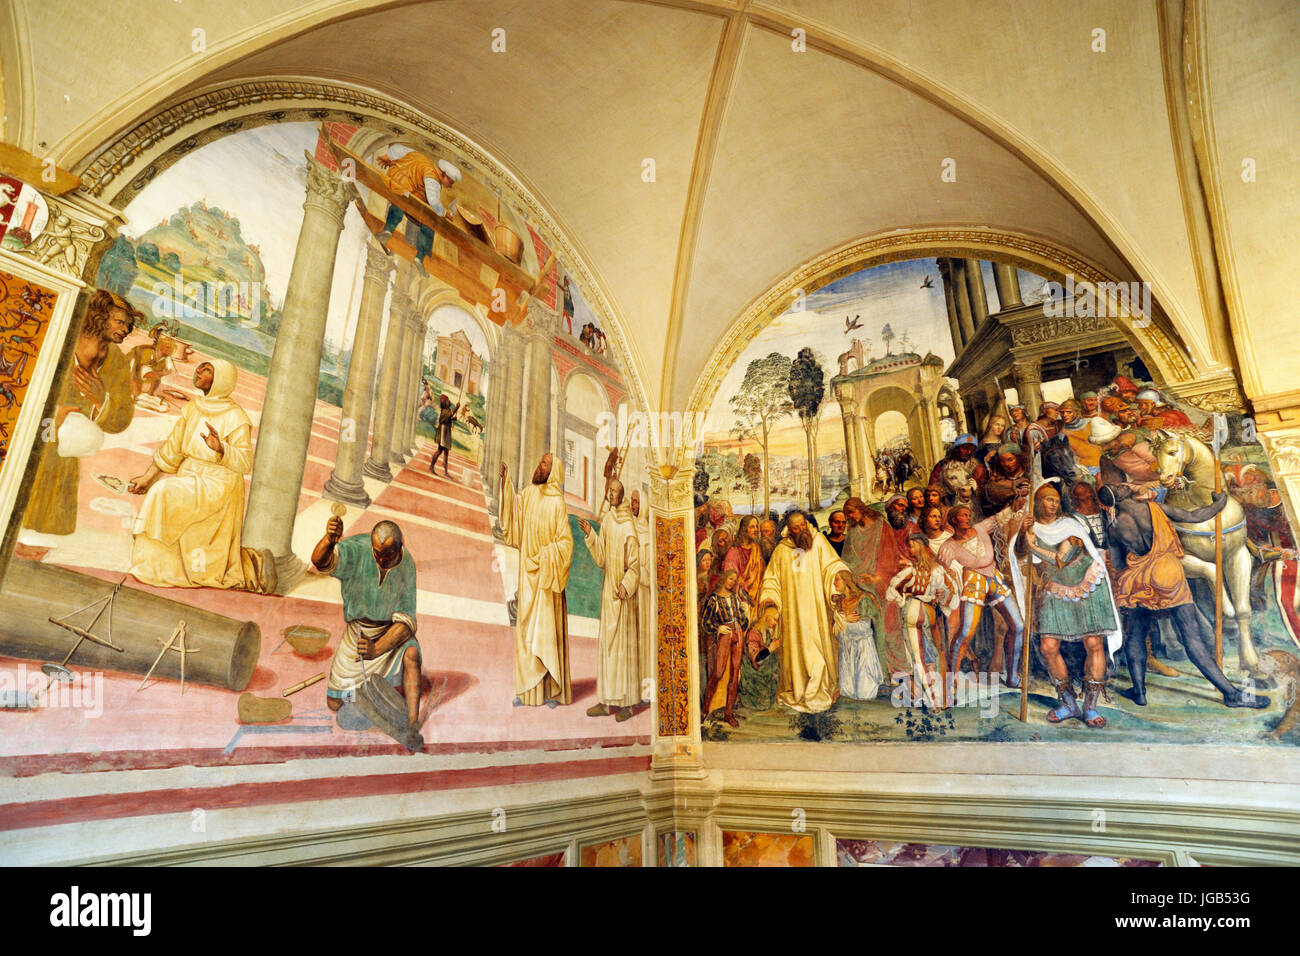 Renaissance frescos, st Benedict life, paintings by Il Sodoma, Chiostro Grande, Abbey of Monte Oliveto Maggiore, Tuscany, Italy Stock Photo